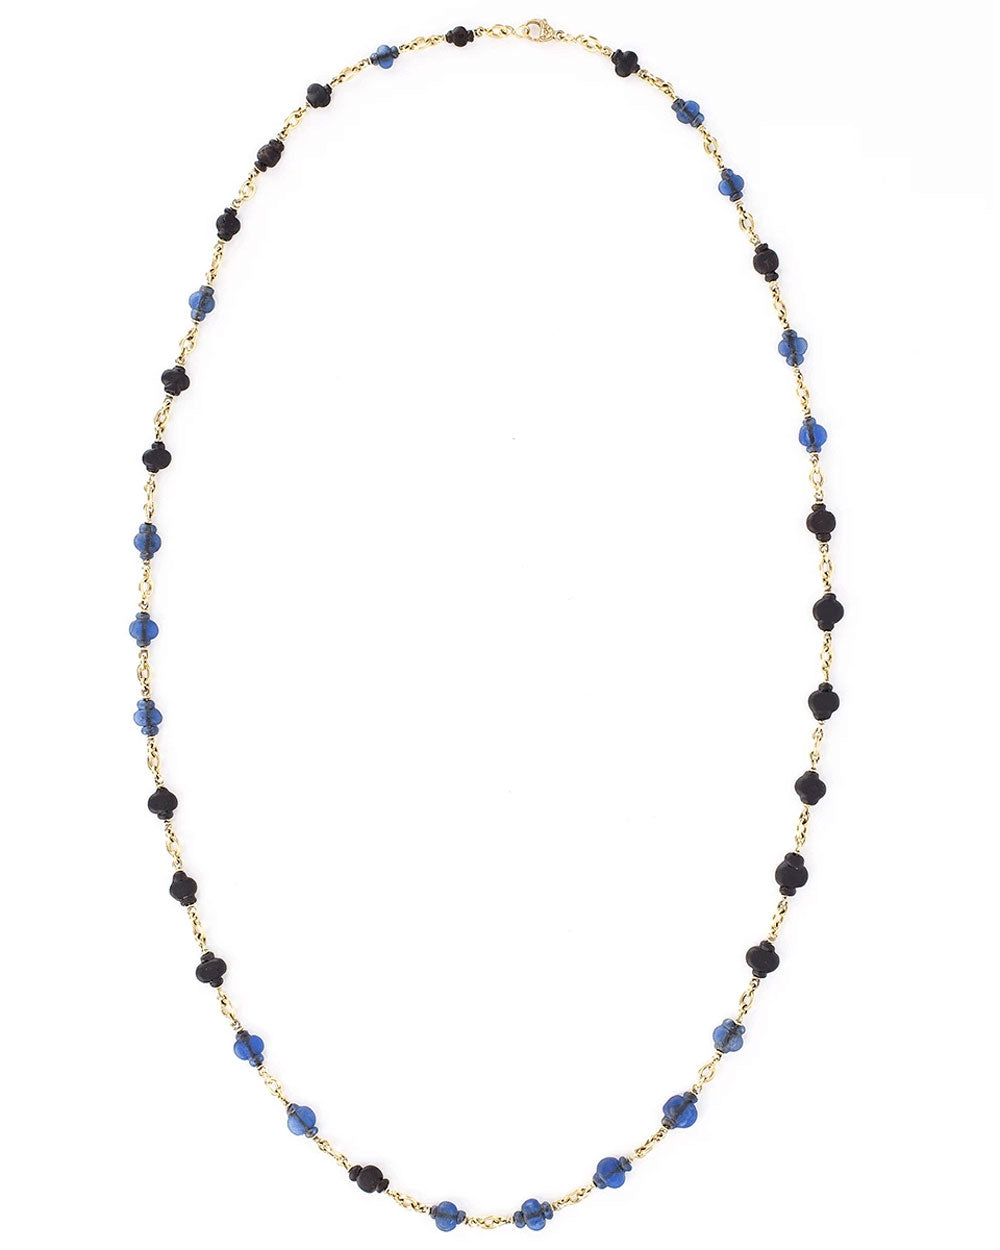 5th Century Cambodian Glass Beaded Link Necklace